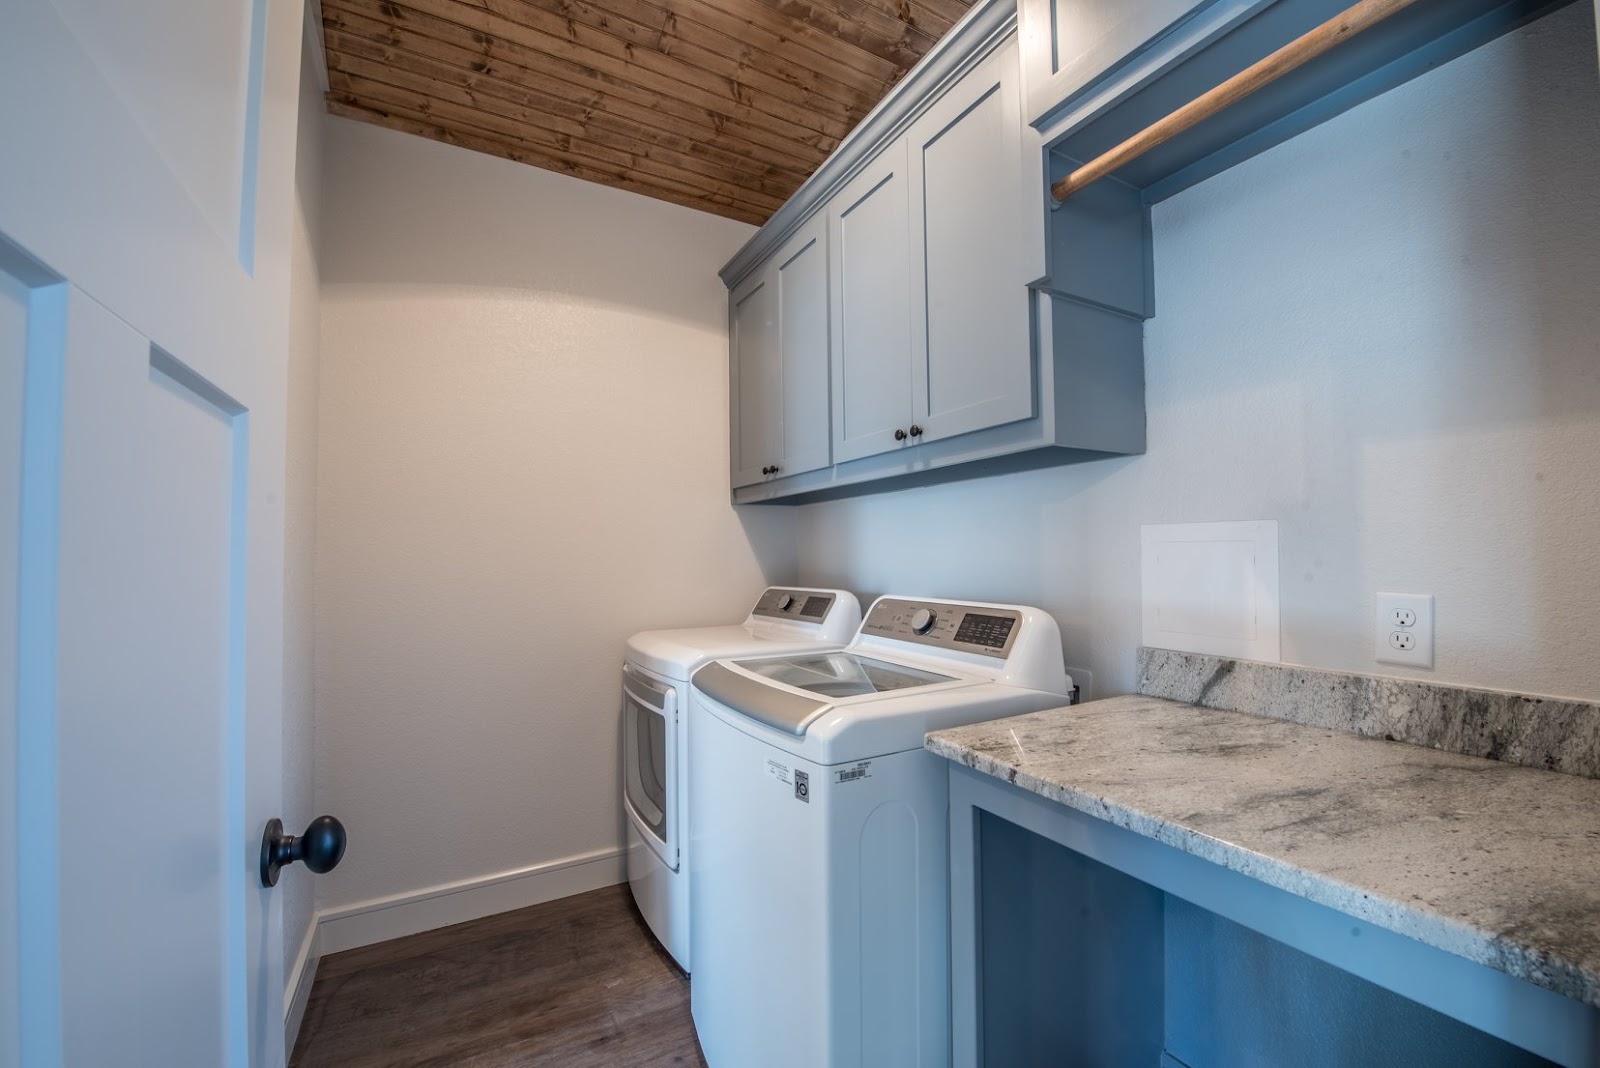 laundry room with muted blue and wood elements